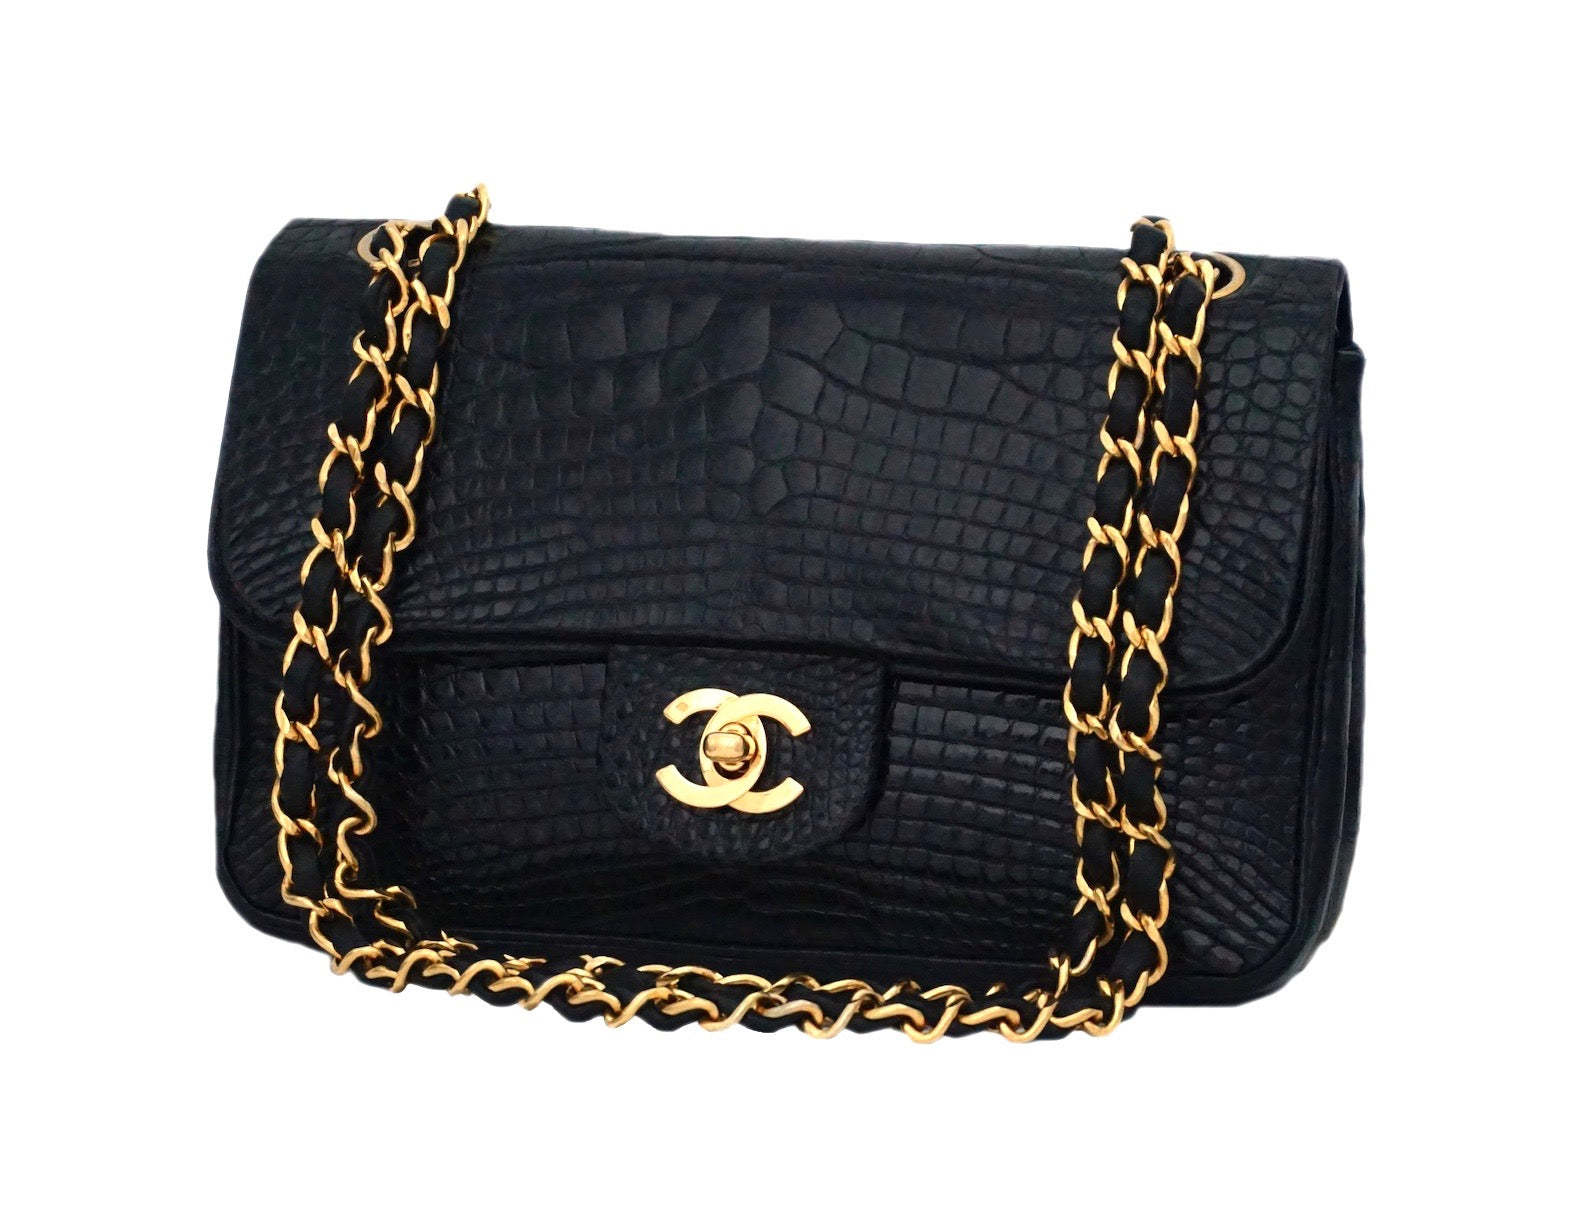 Chanel Black Crocodile Stitch Satin Reissue 2.55 227 Double Flap Bag - Handbag | Pre-owned & Certified | used Second Hand | Unisex